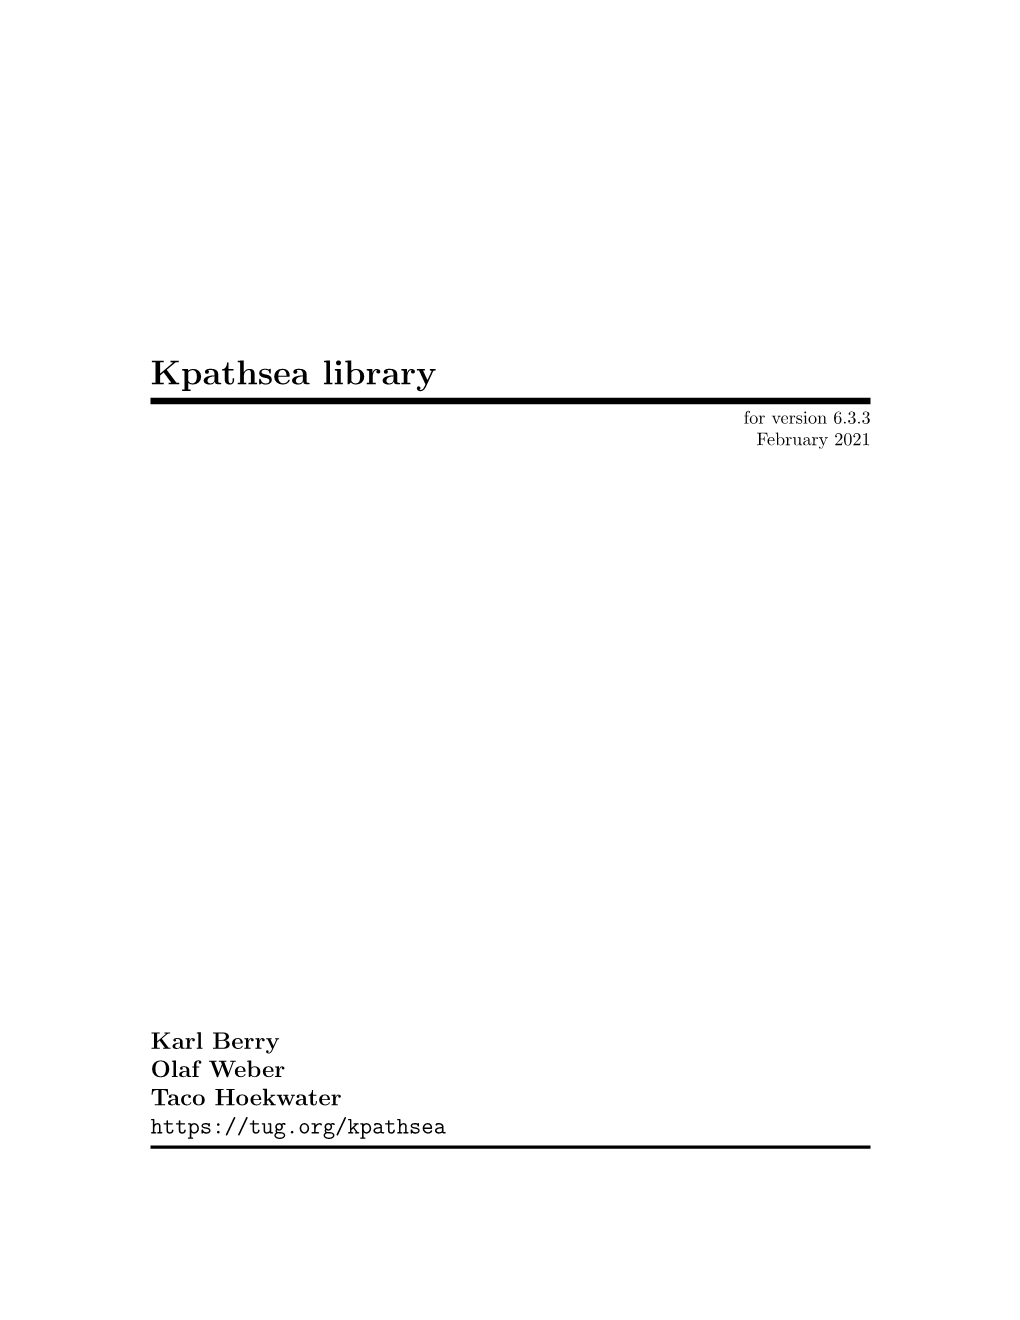 Kpathsea Library for Version 6.3.3 February 2021